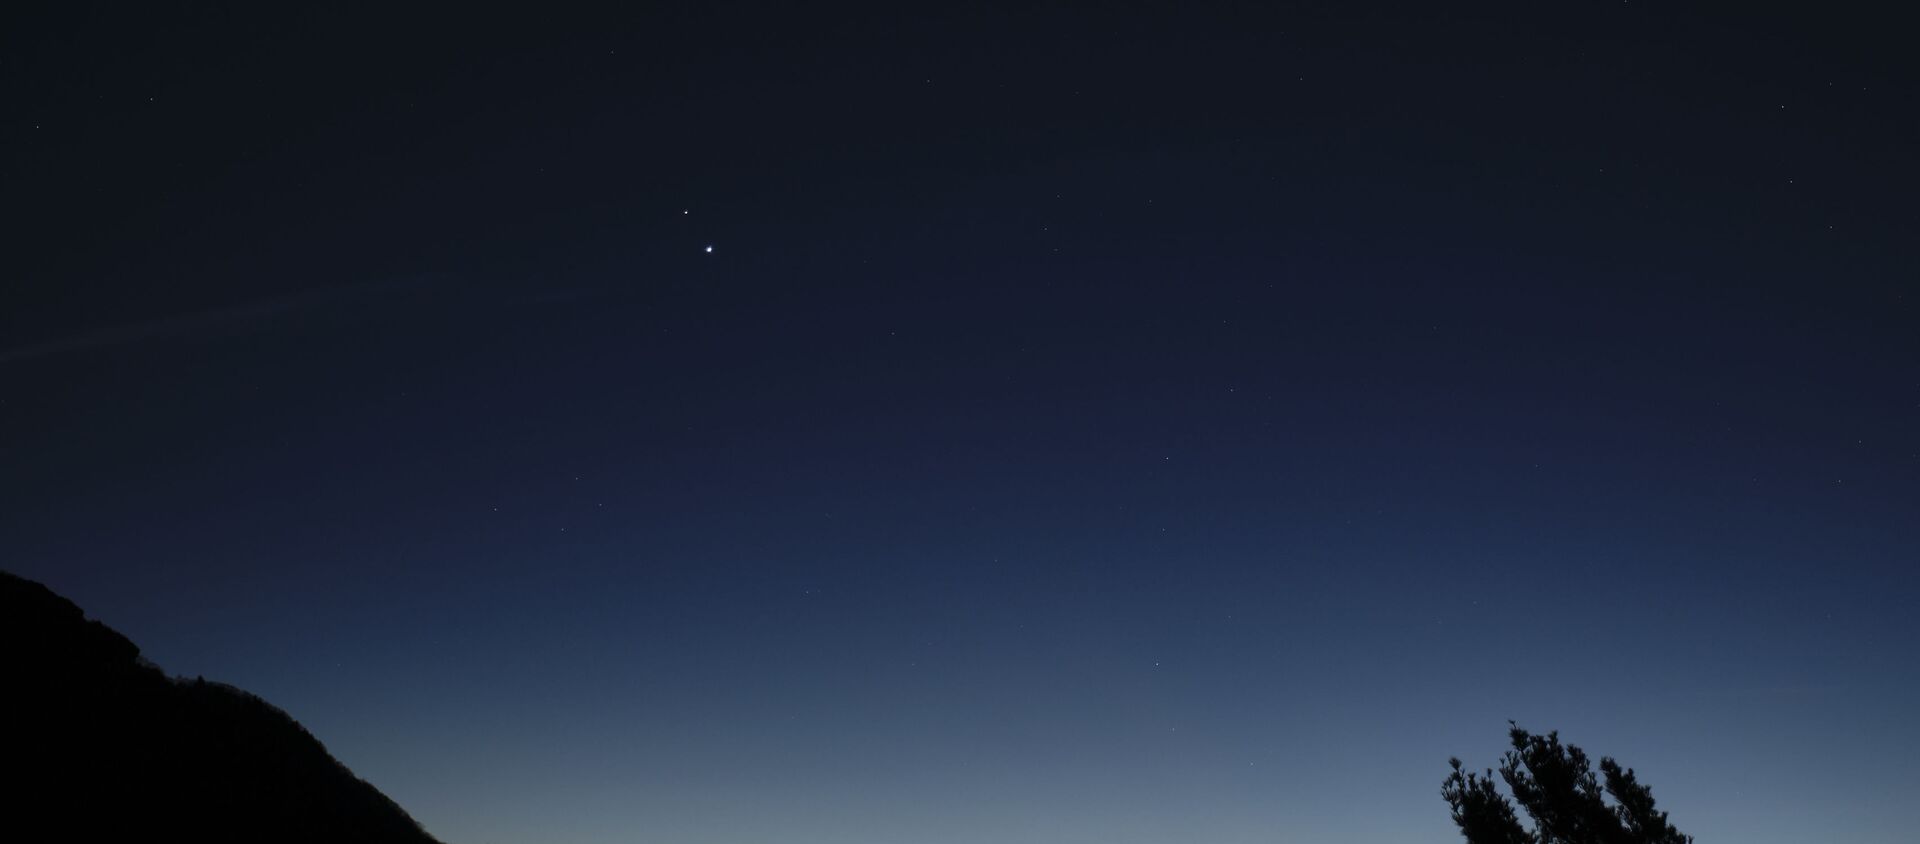 Saturn, top, and Jupiter, below, are seen after sunset from Shenandoah National Park, Sunday, Dec. 13, 2020, in Luray, Virginia. The two planets are drawing closer to each other in the sky as they head towards a “great conjunction” on December 21, where the two giant planets will appear a tenth of a degree apart. - Sputnik International, 1920, 11.02.2021